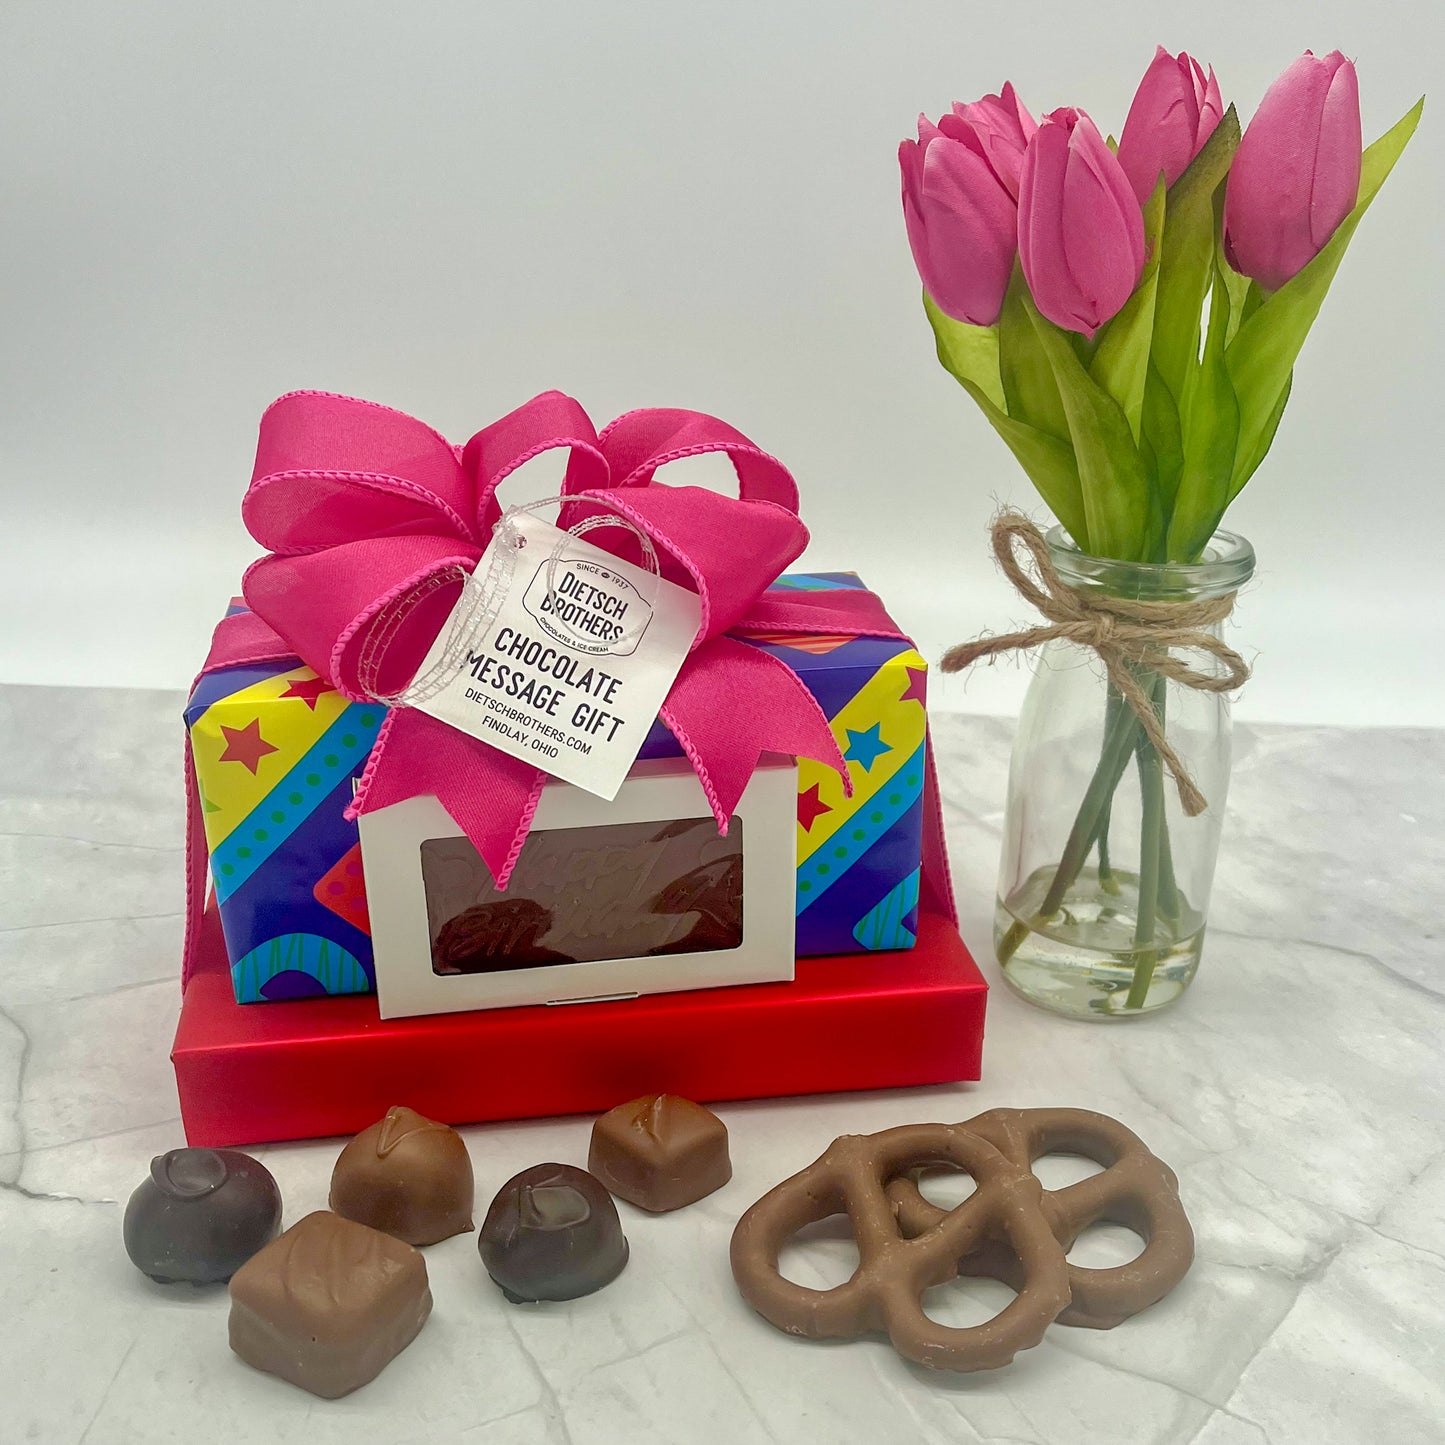 Two layered tower of assorted treats wrapped in solid red paper and "happy birthday" paper, with a milk chocolate bar featuring "Happy Birthday" on the front of the package, all topped with a pink bow